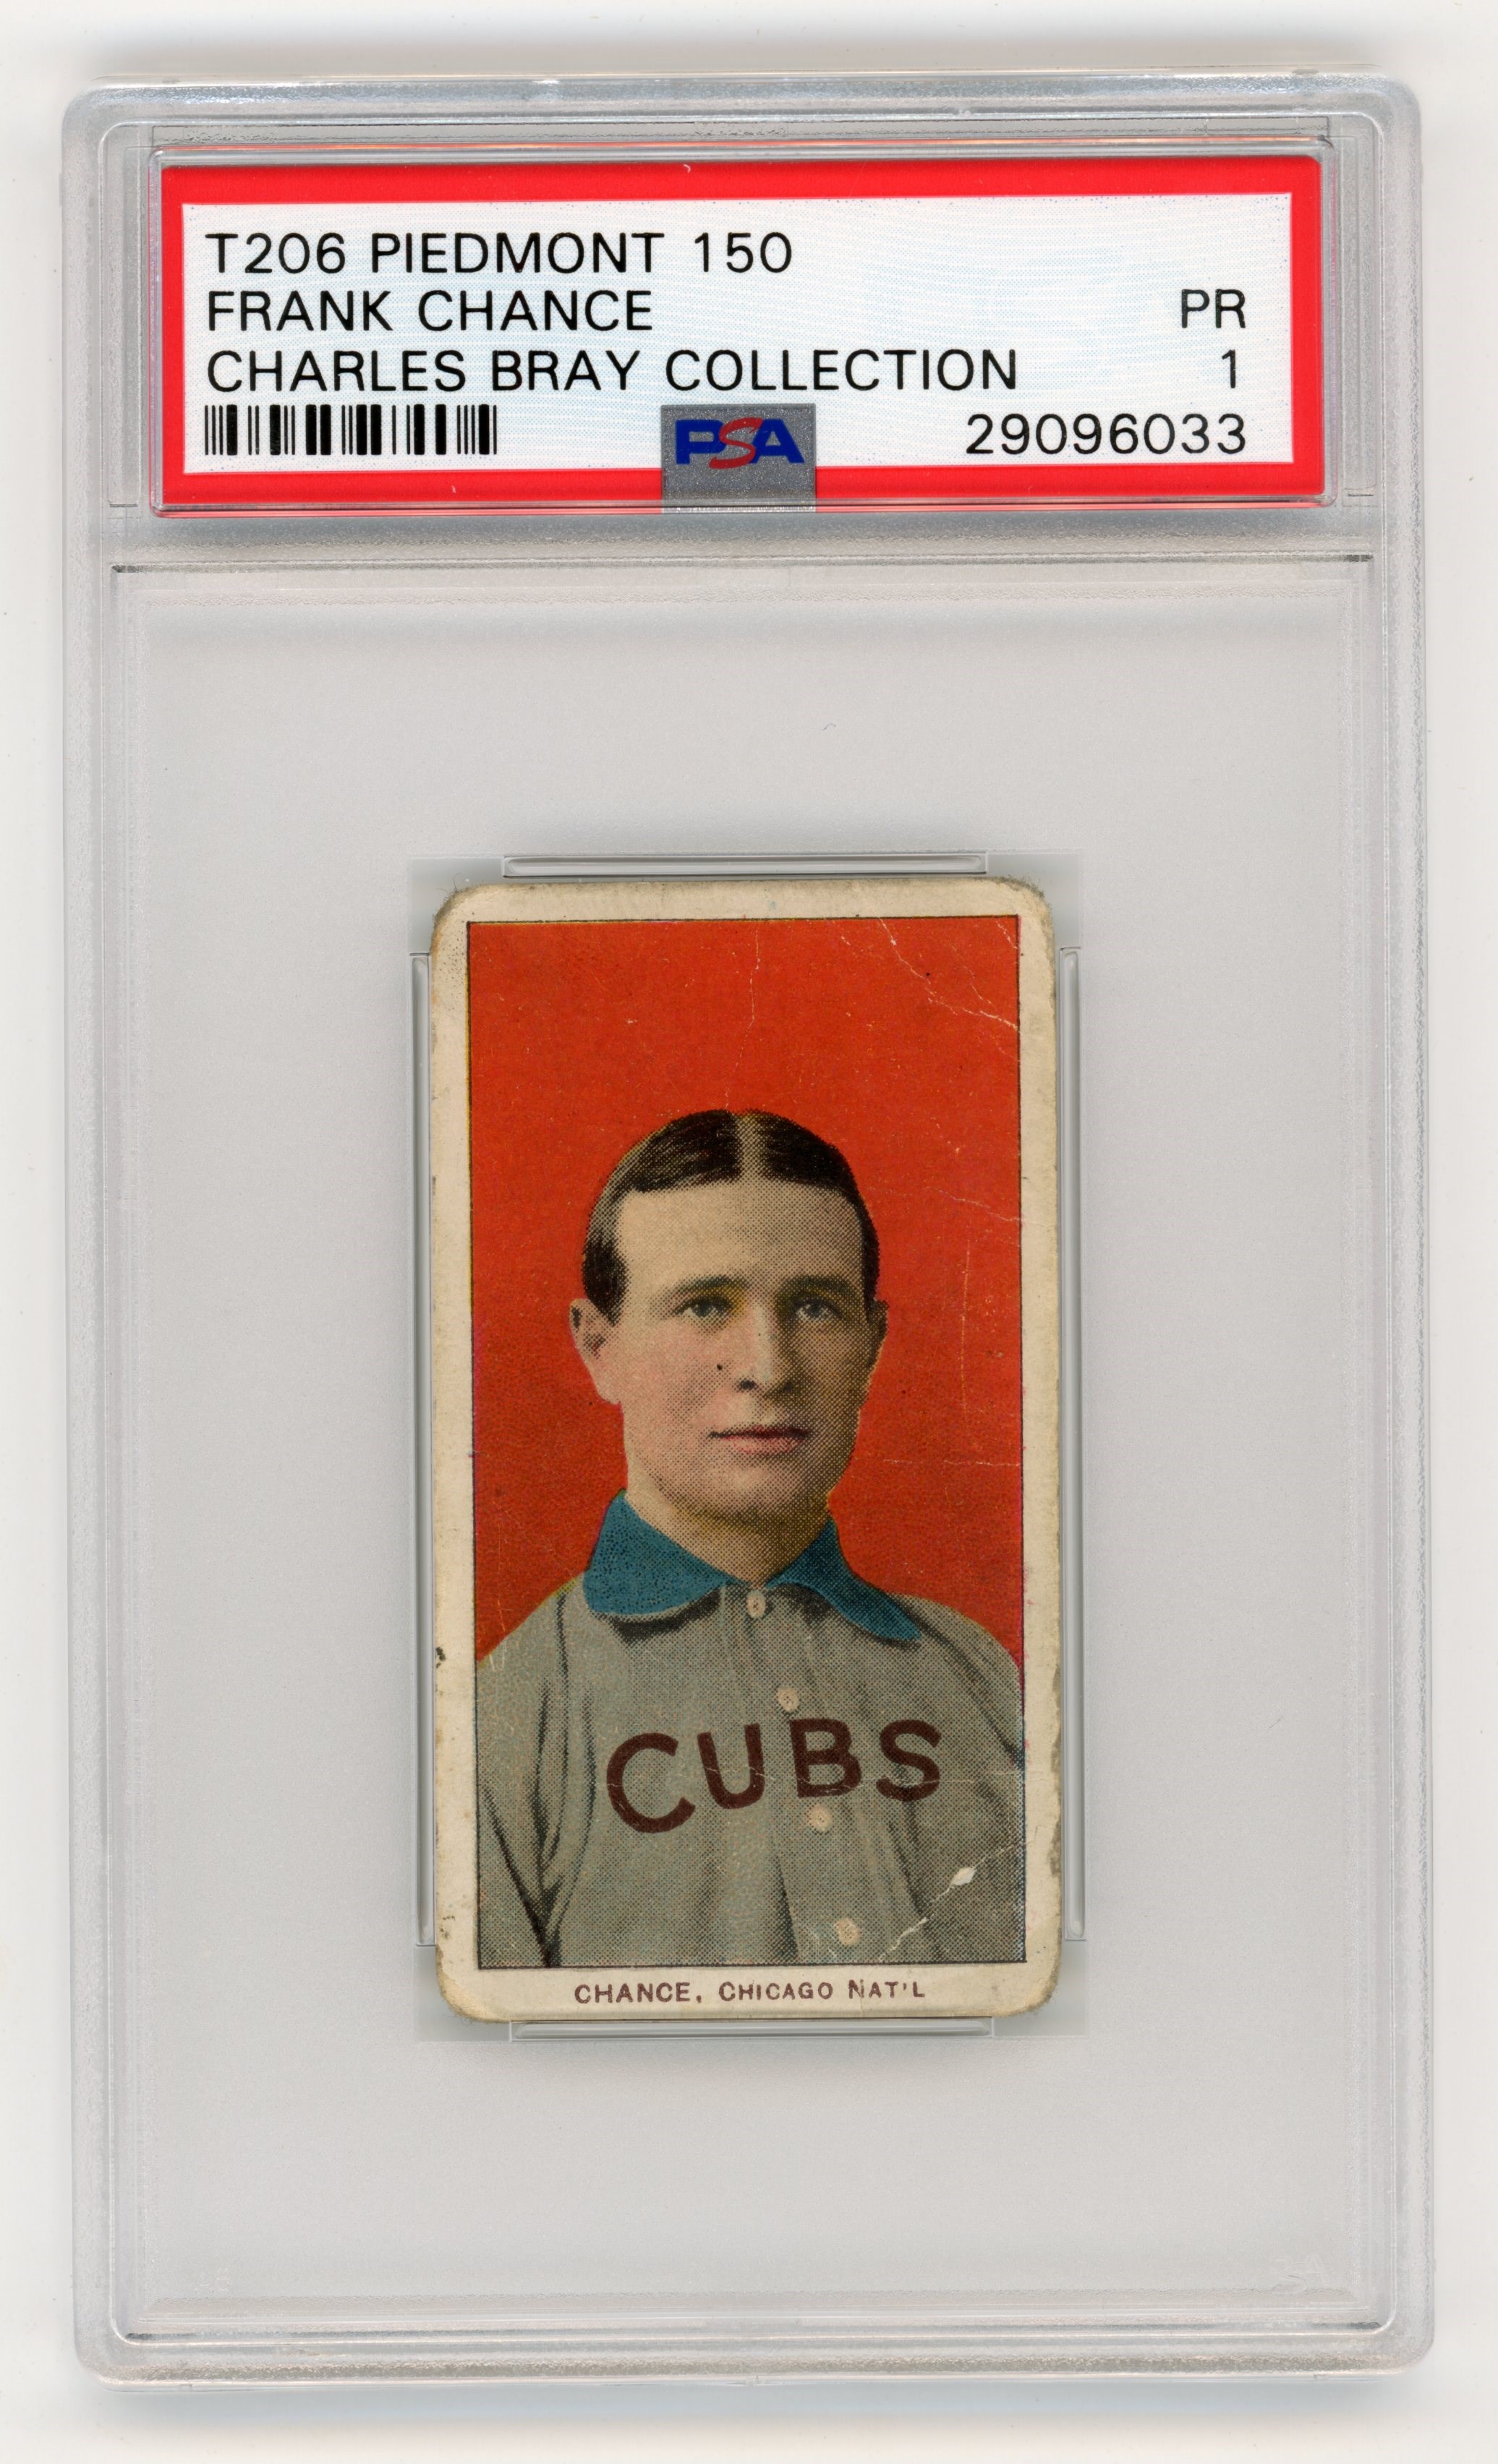 Baseball and Trading Cards - T206 Piedmont 150 Frank Chance PSA 1 From Charles Bray Collection